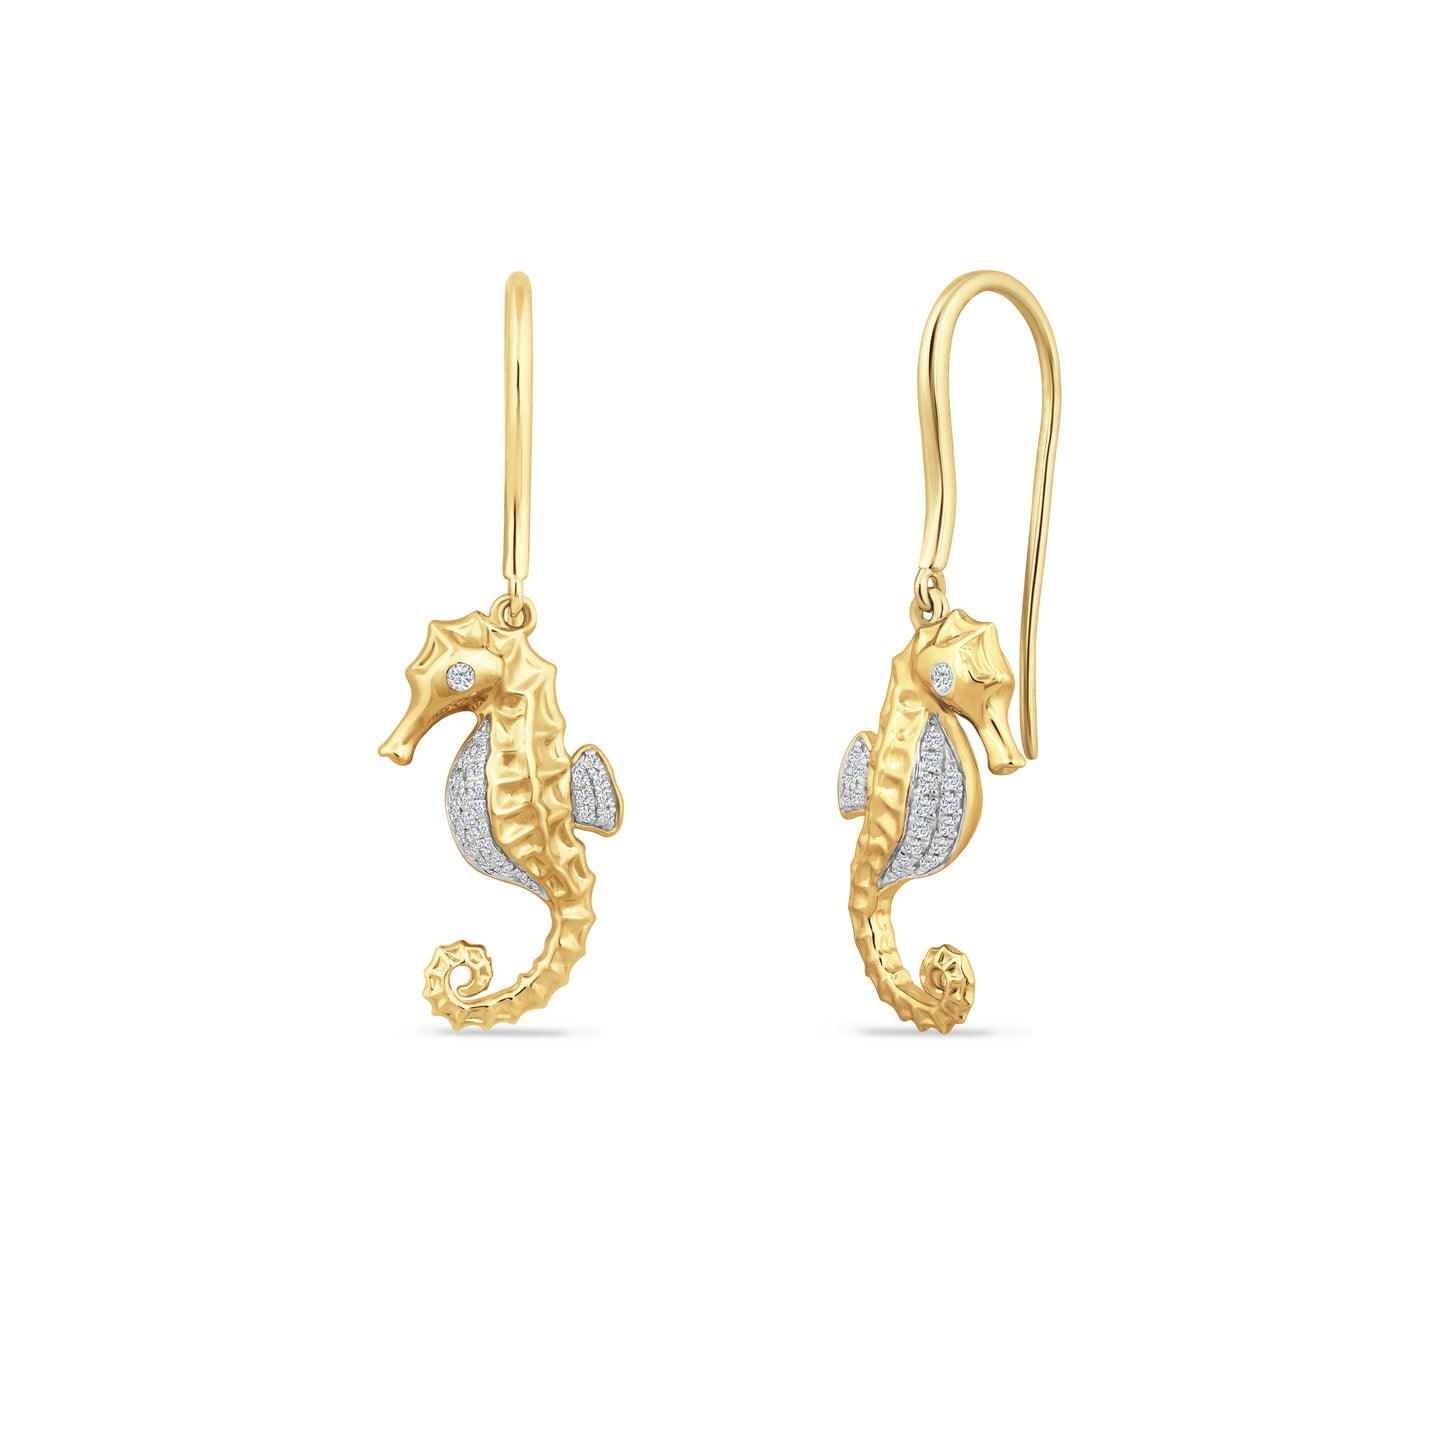 14K SEAHORSE EARRINGS 7MM X 18MM WITH 38 DIAMONDS 0.13CT